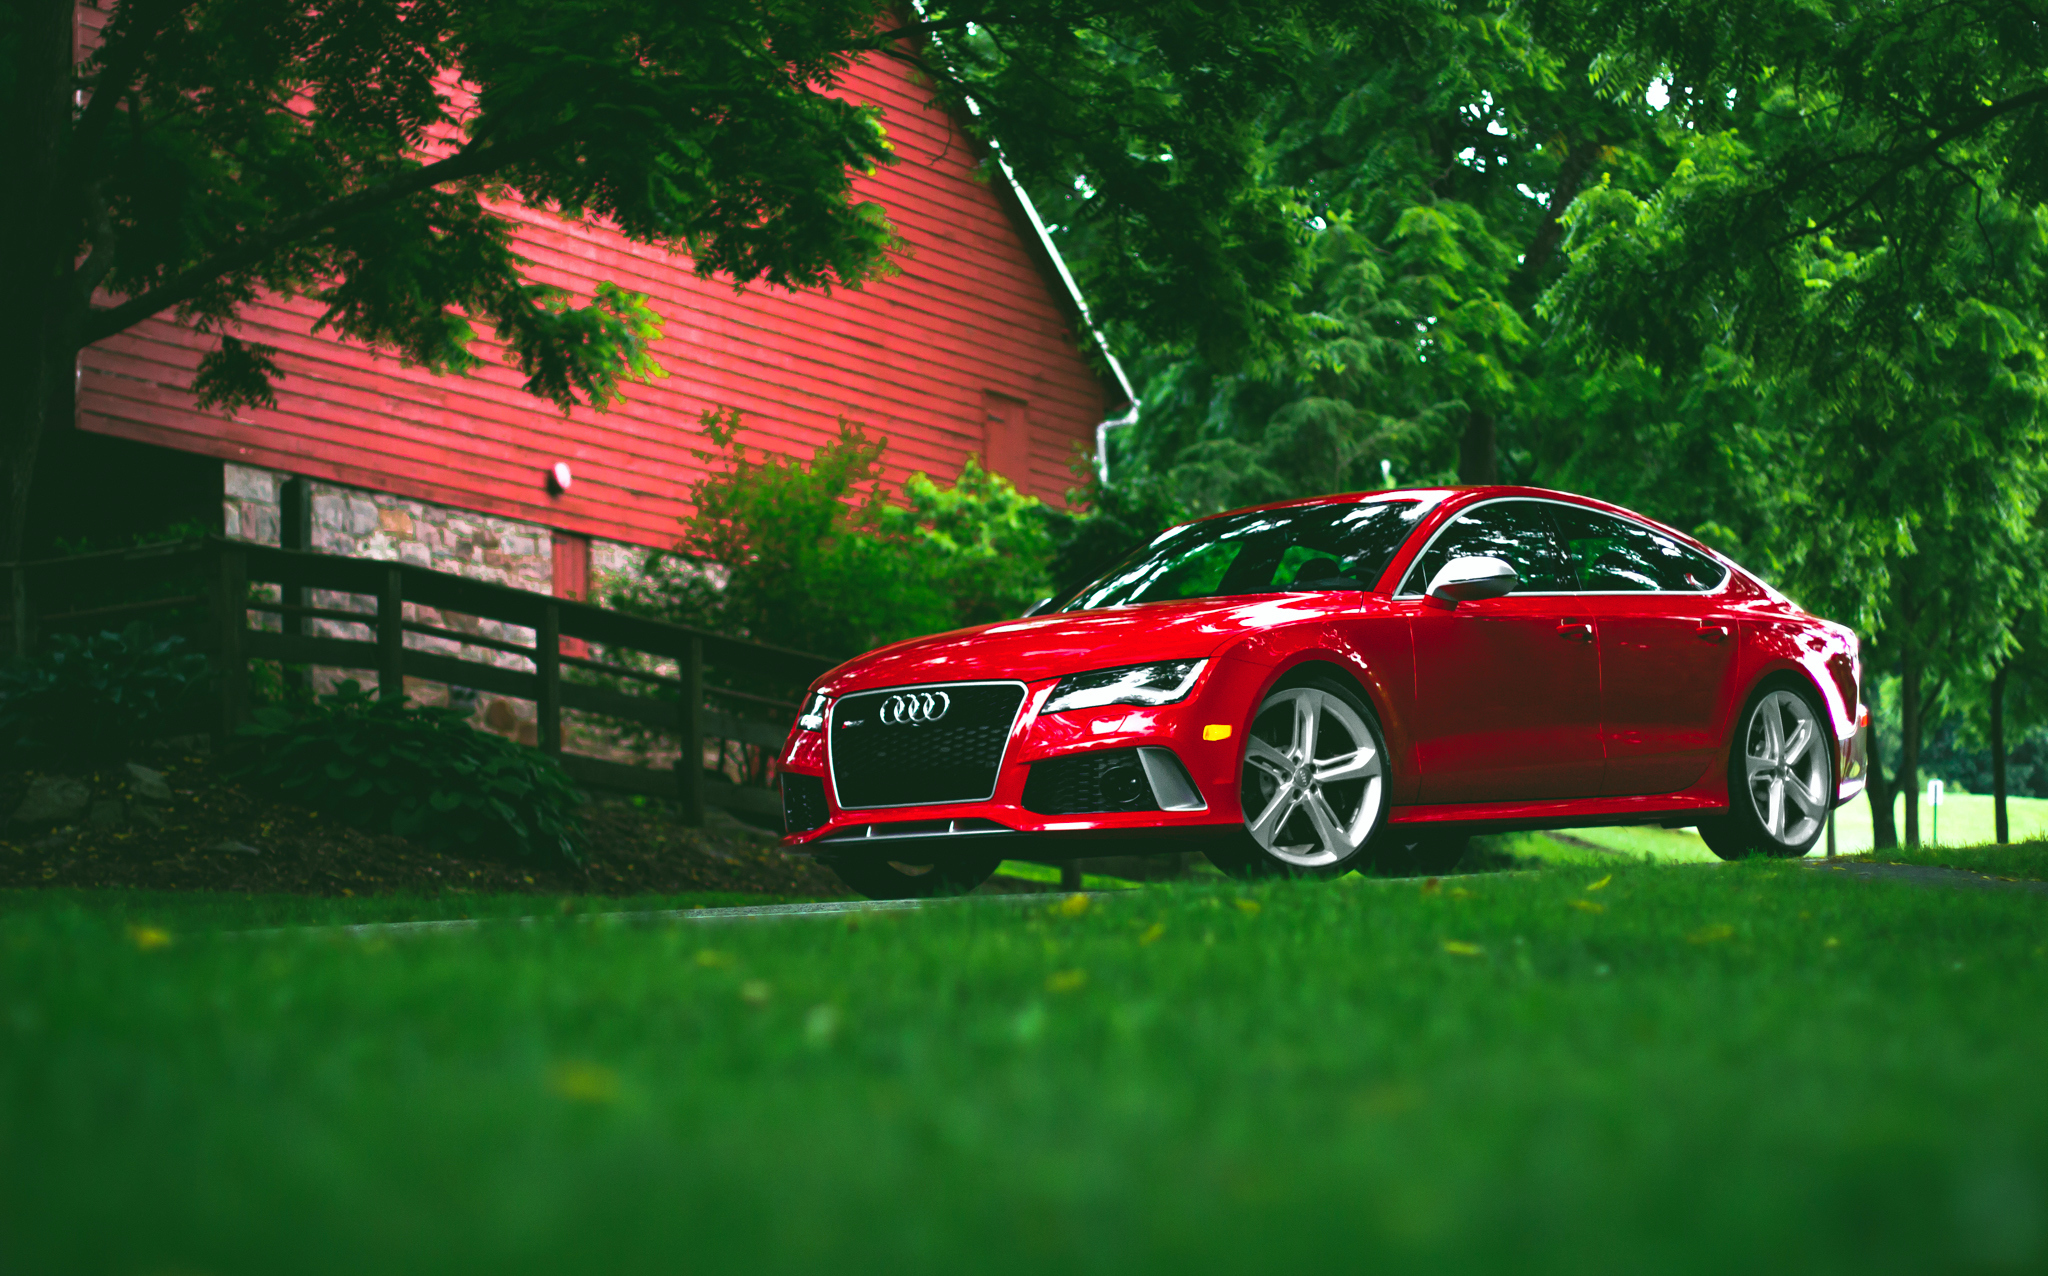 side view, audi, red, grass, cars, rs7